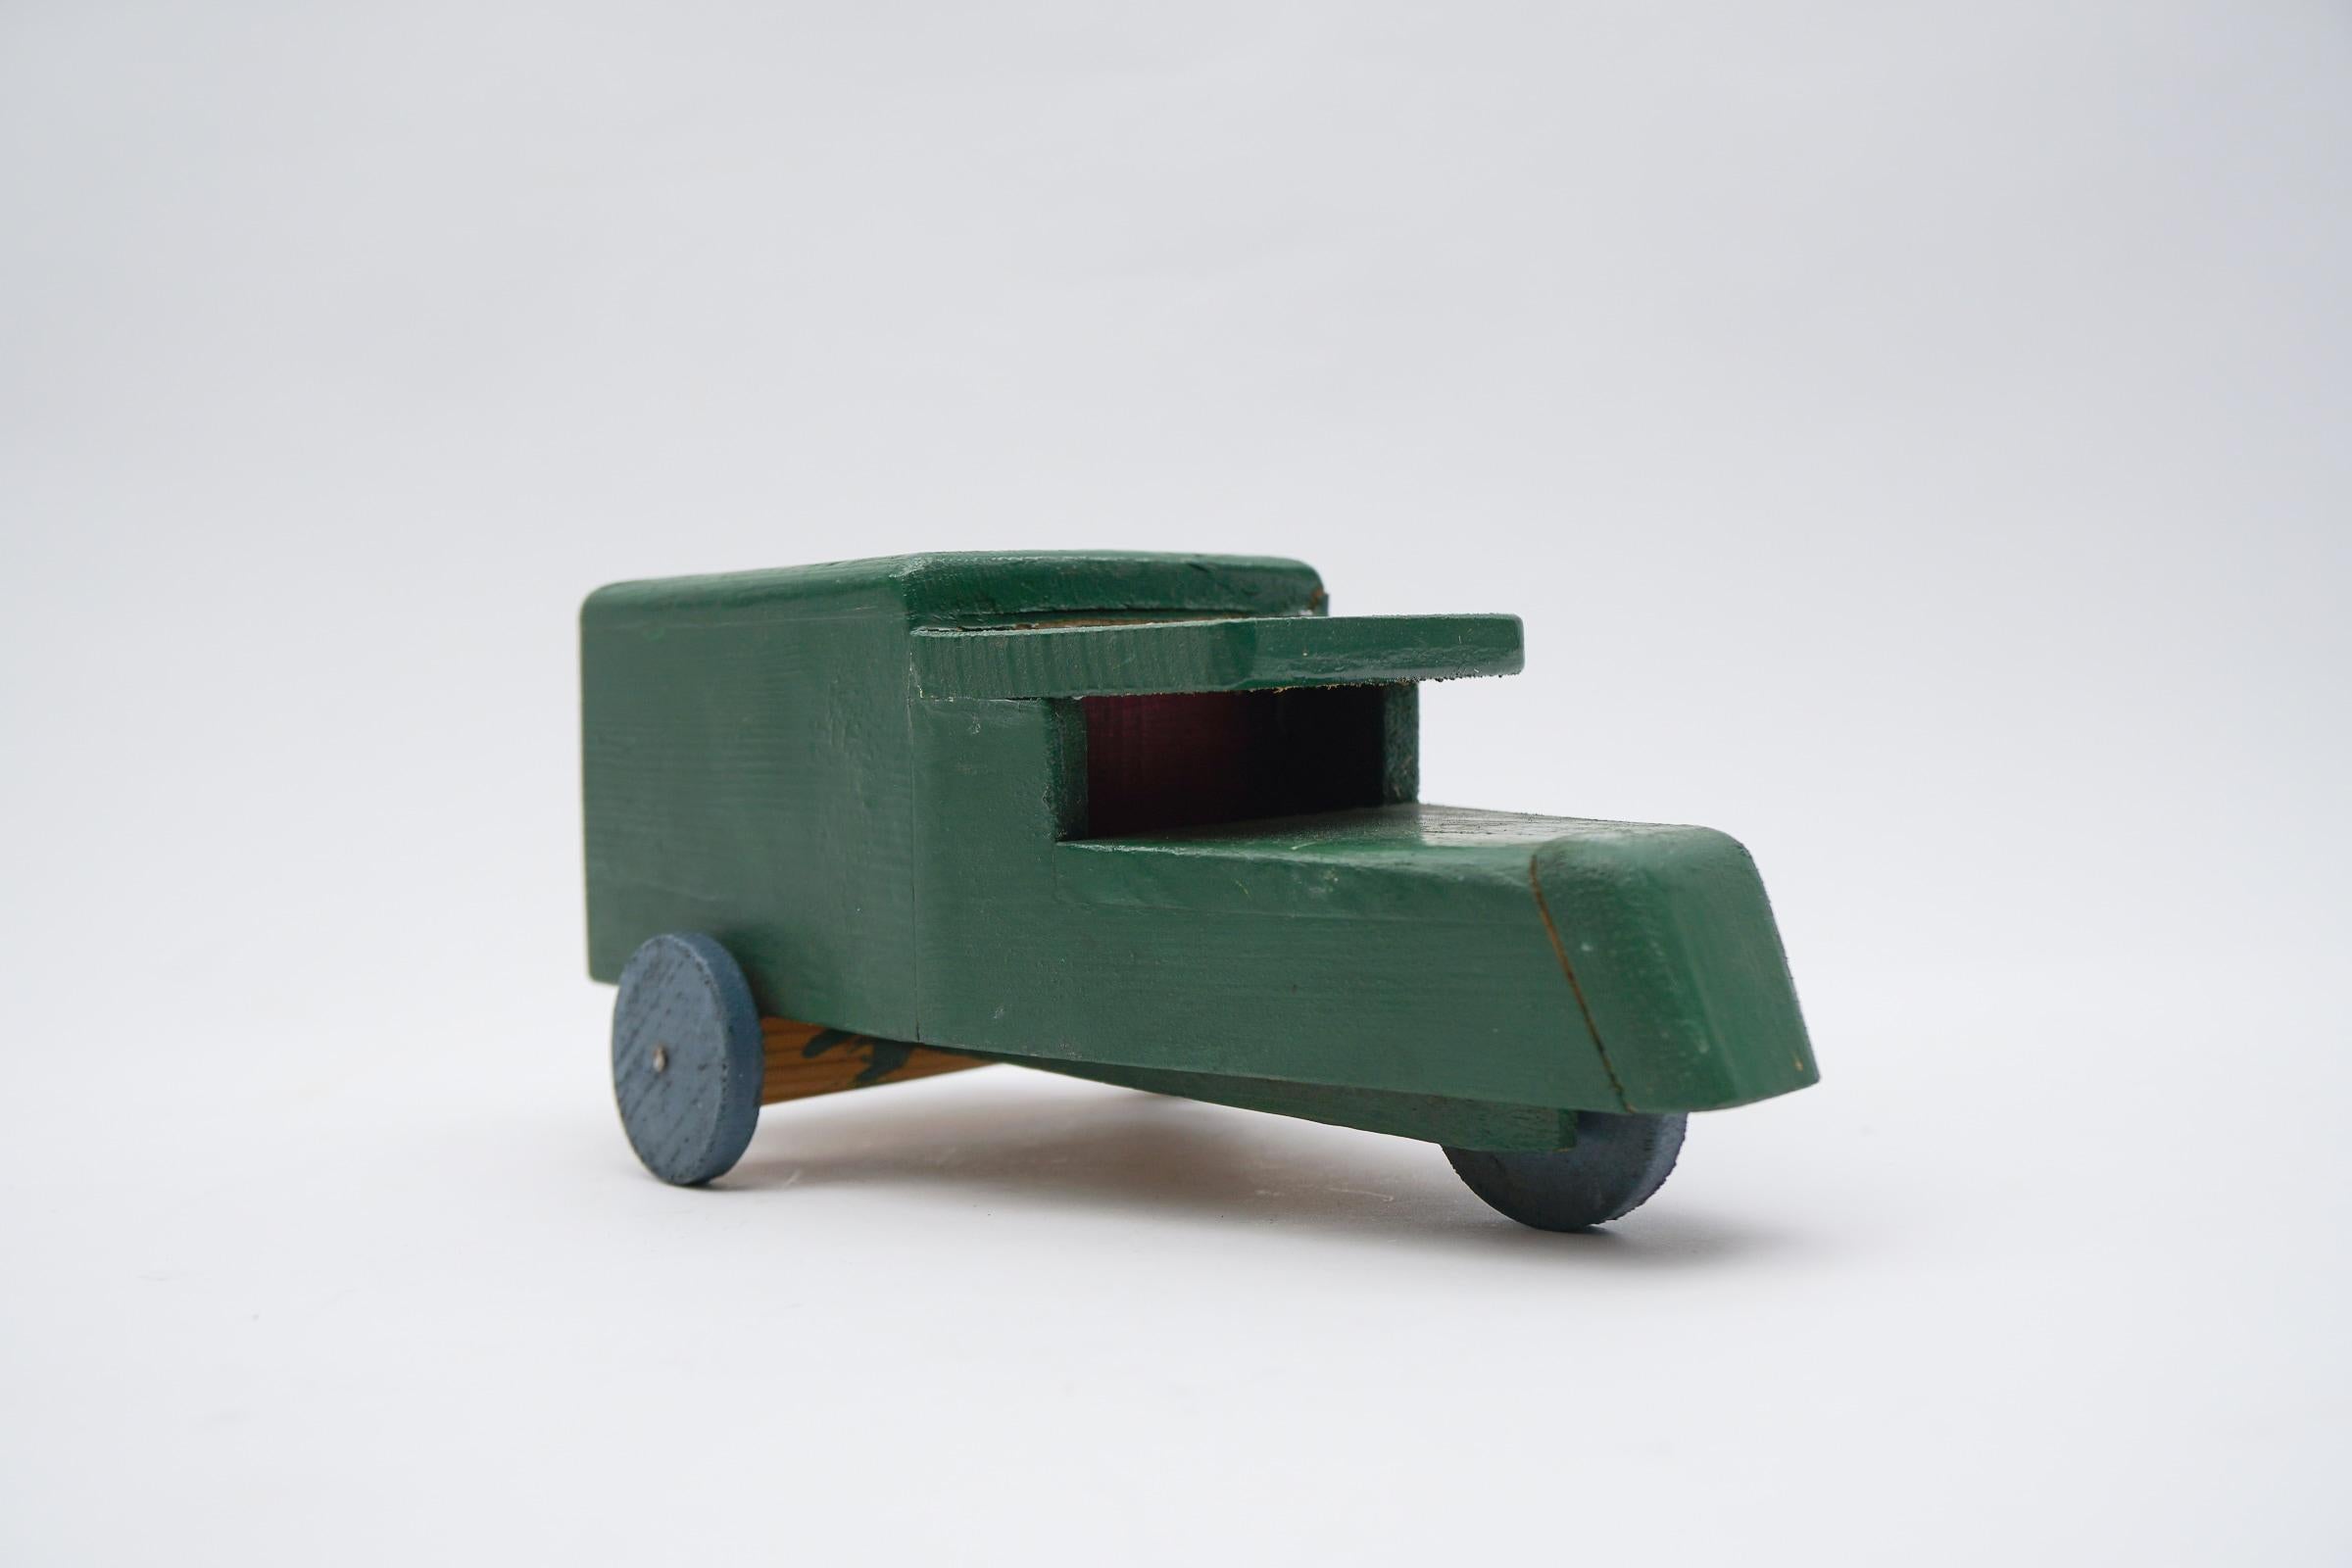 Metal Typical Handmade Military Vehicle from the 2nd World War, 1940s / 1950s. For Sale